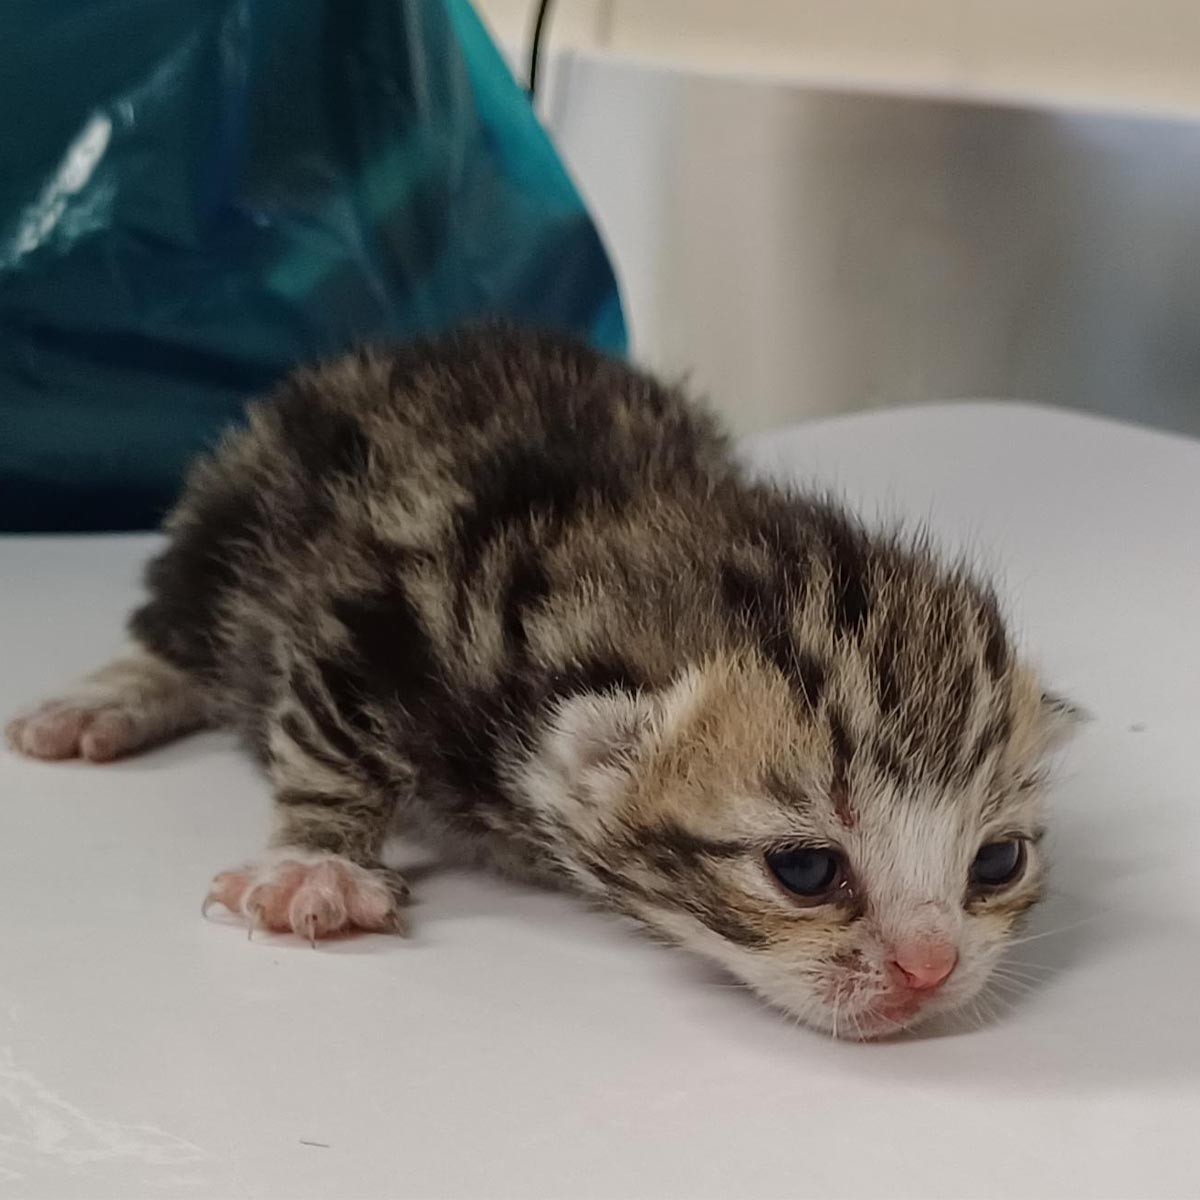 Thanks to @ITVAnglia and @LeithesITV for visiting Woodgreen this week and sharing our kitten story! Found in a van, this lucky litter were saved just minutes before it was due to be crushed in a scrapyard. They were then brought into our care: bit.ly/3wLmkGY